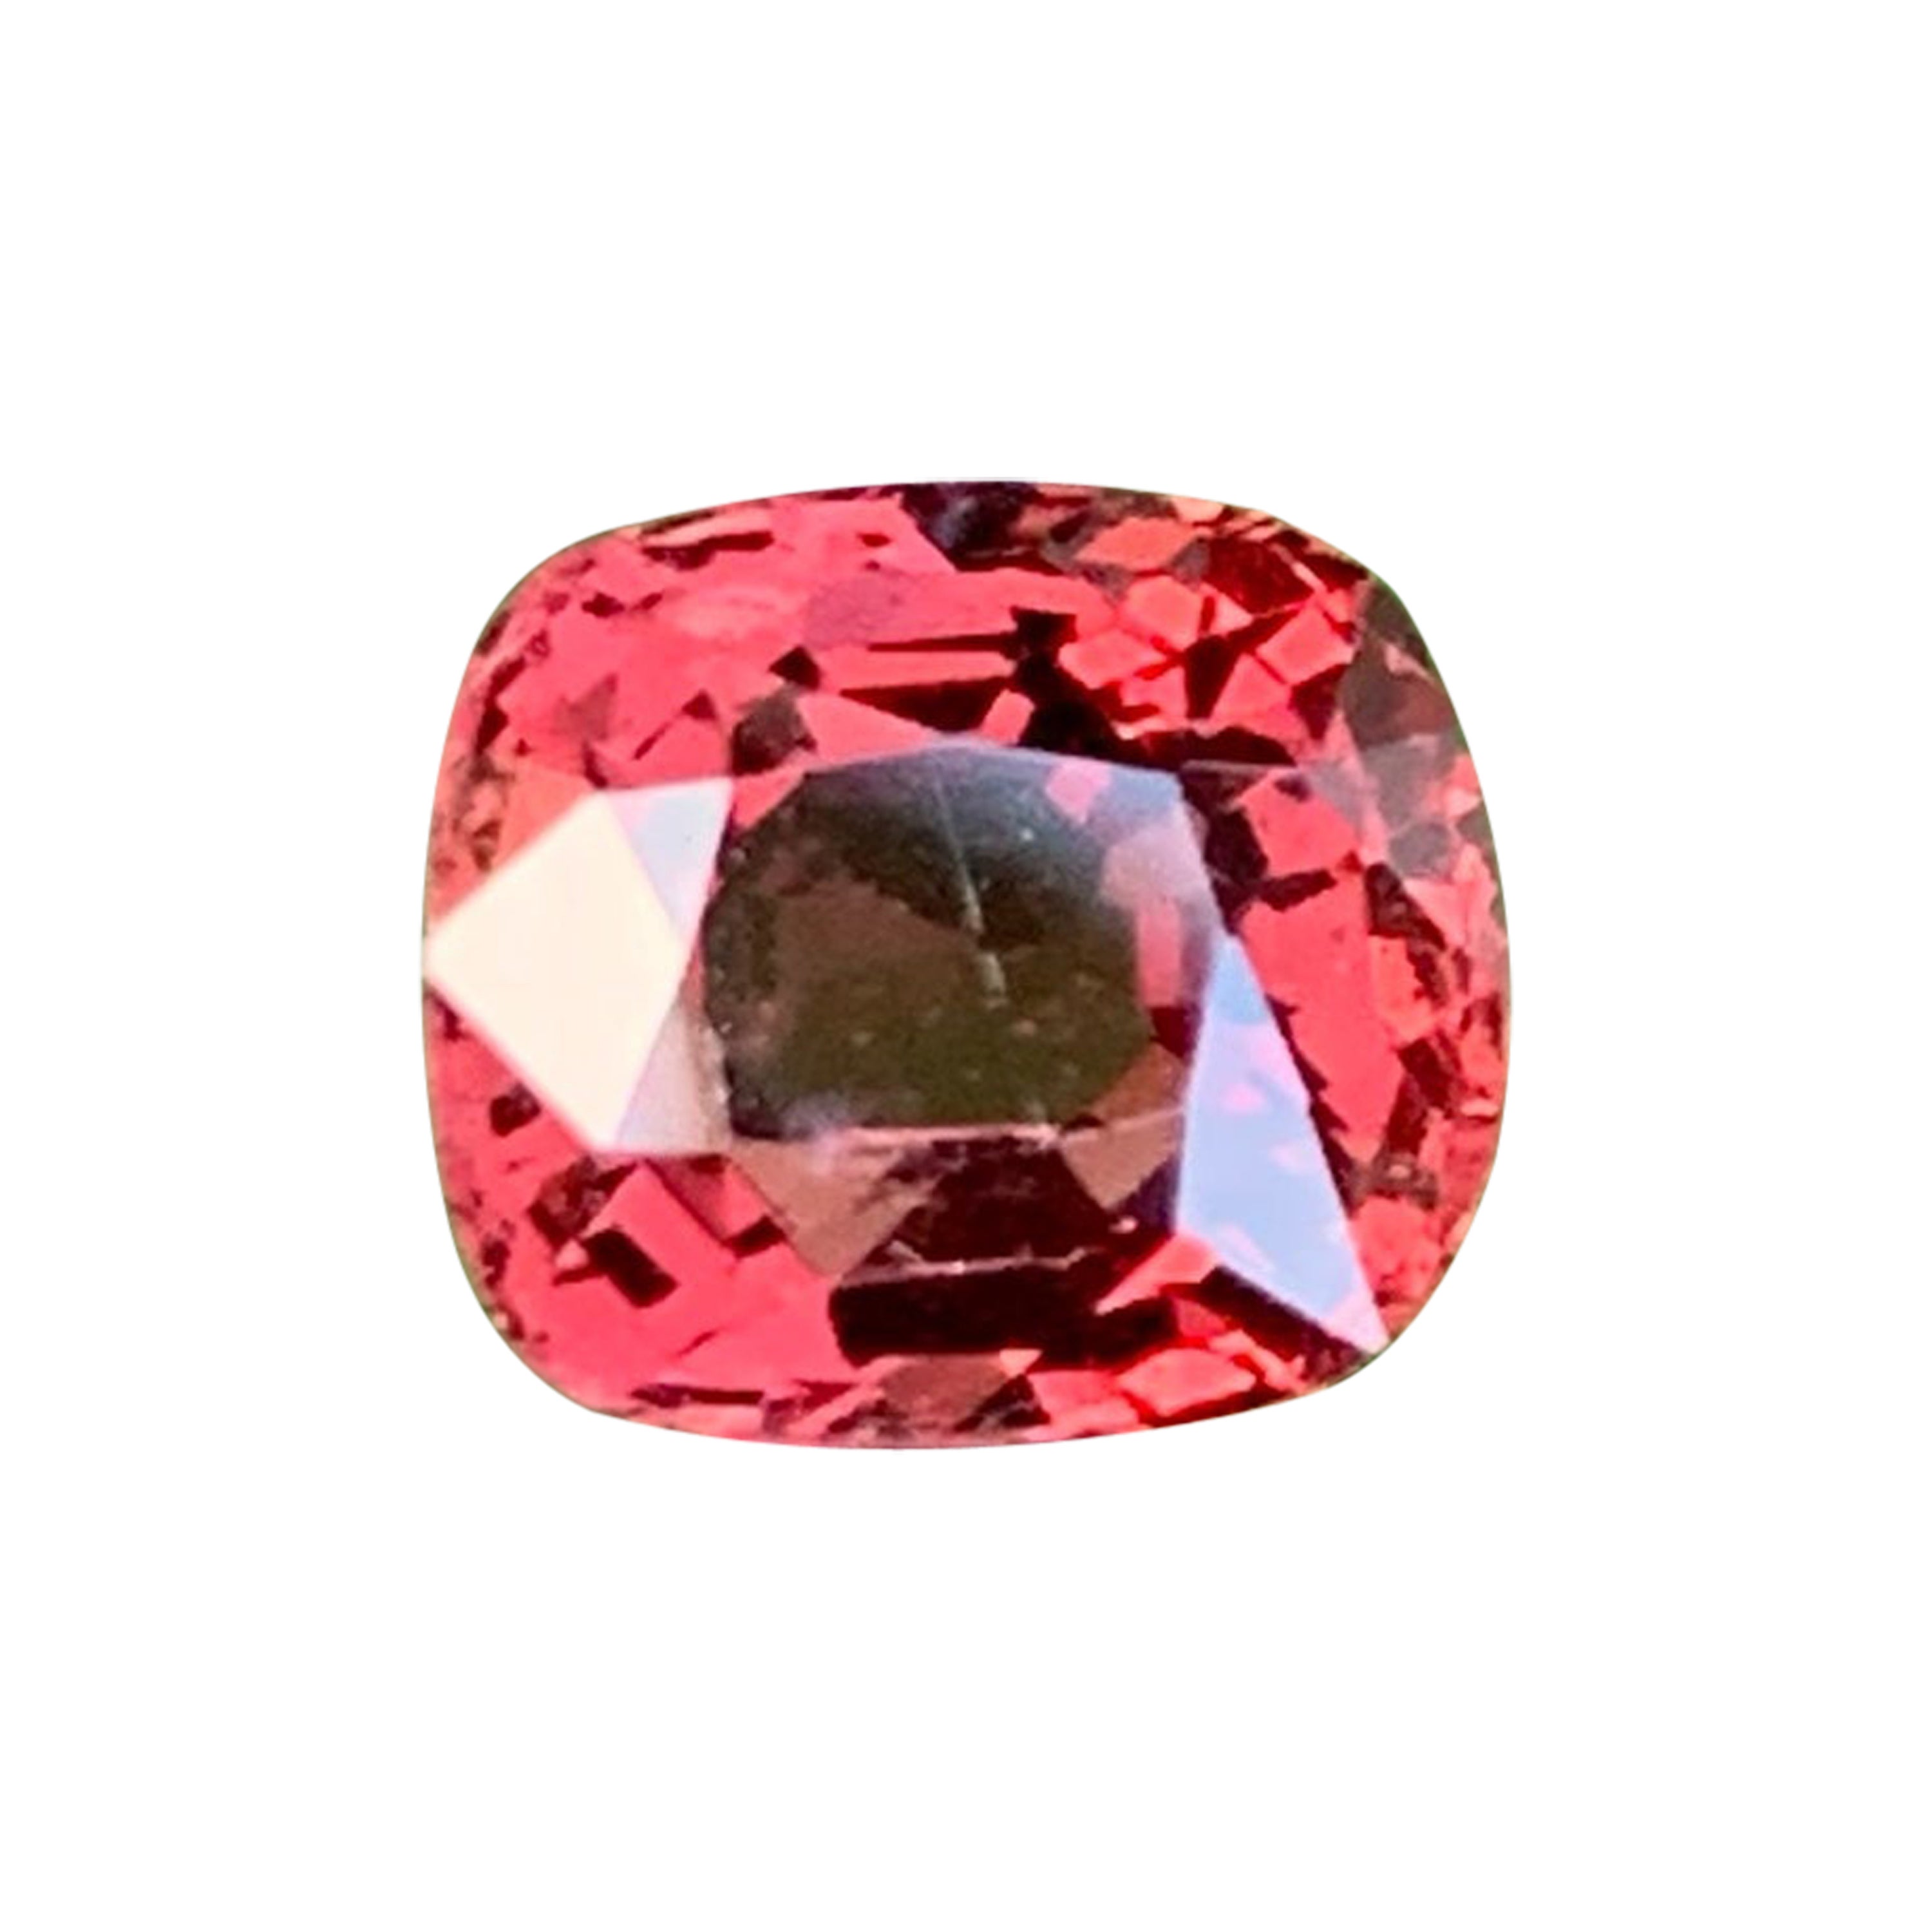 Majestic Orange Red Spinal Cut Gemstone 1.15 Carats AIG Certified Spinel Stone For Sale